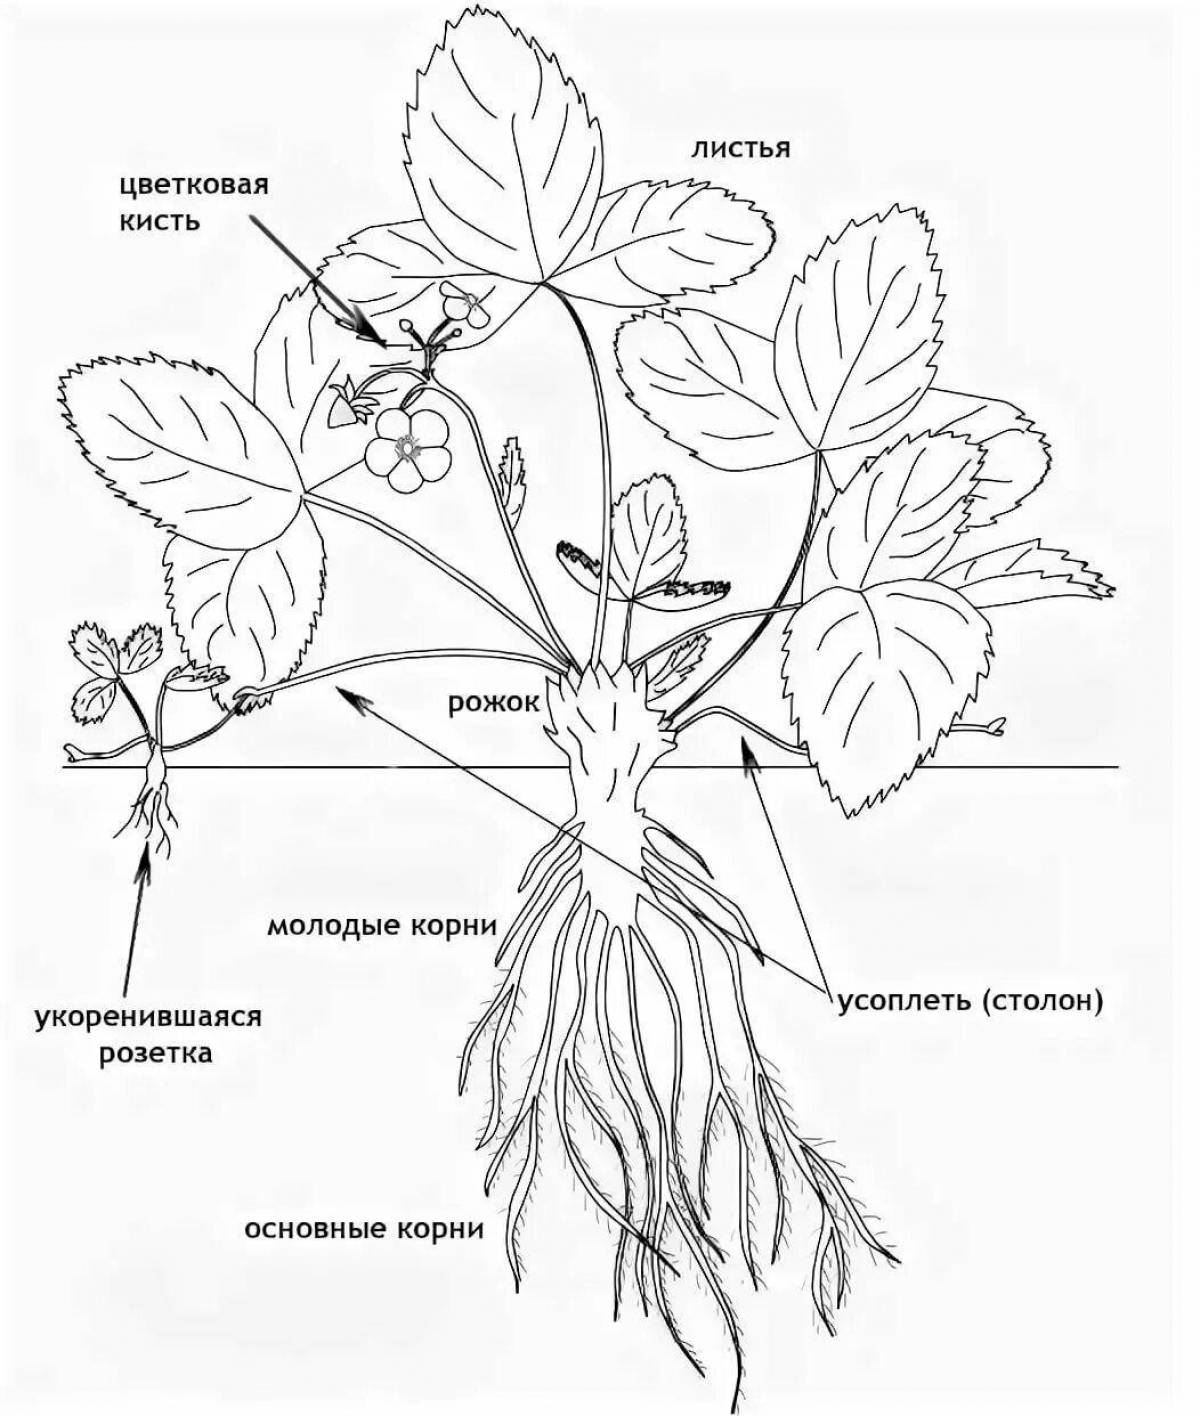 Coloring page of animated plant parts